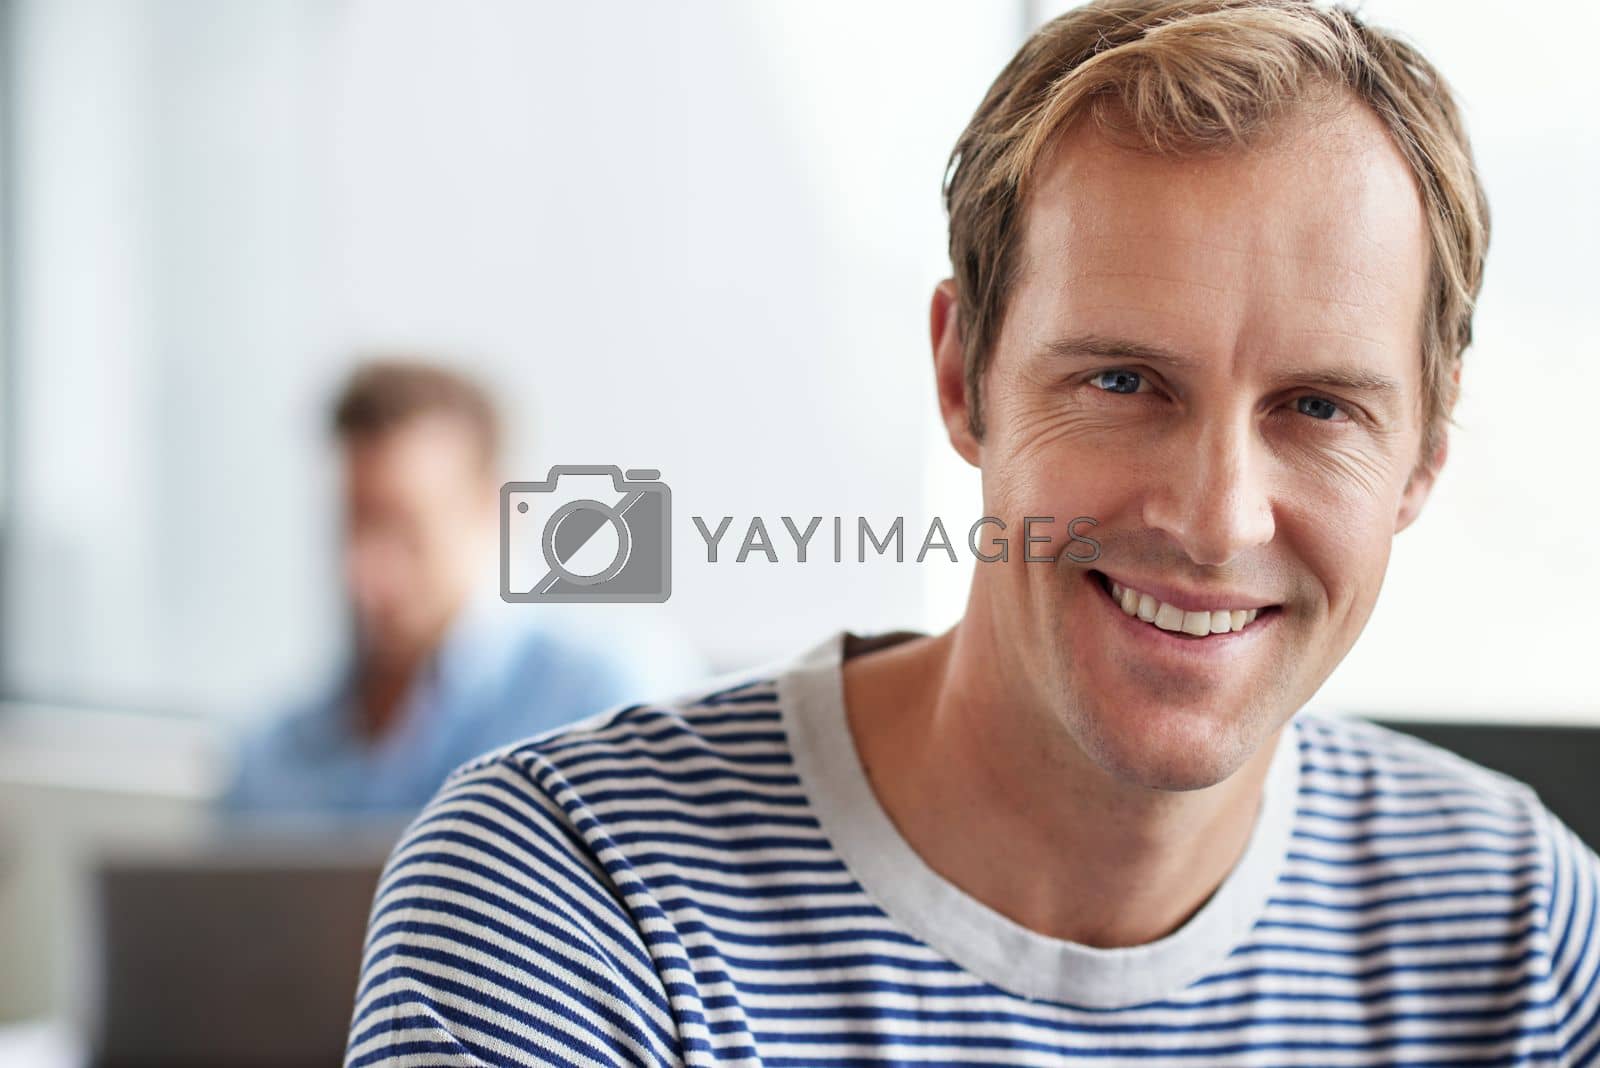 Royalty free image of Workplace contentment. Portrait of smiling man sitting in a casual work environment. by YuriArcurs